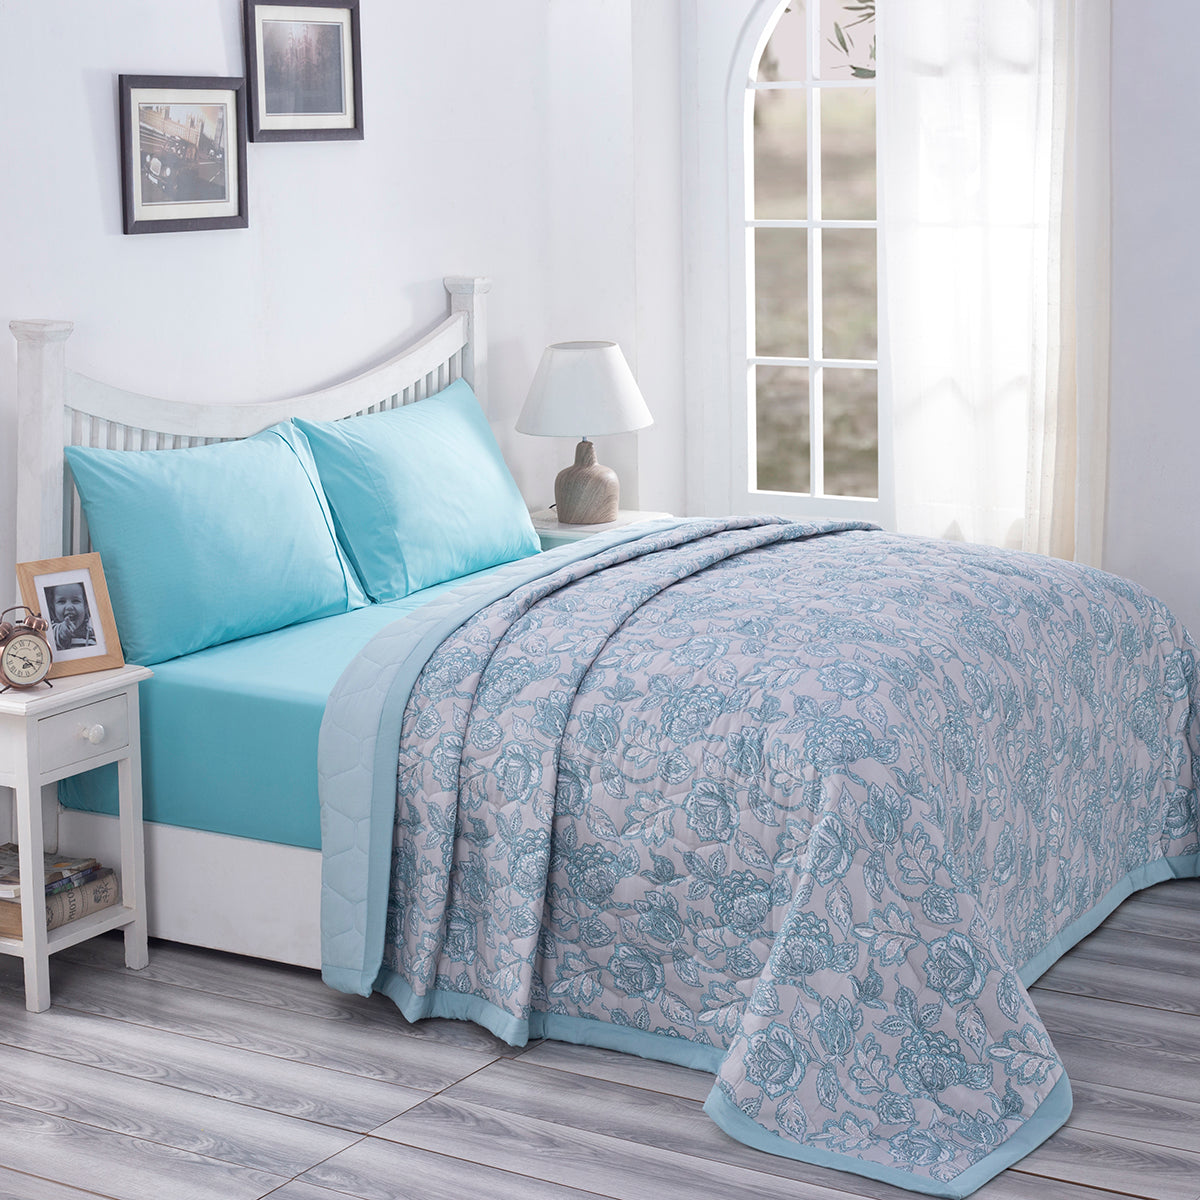 PBS Nomad Scuplt Orlean Summer AC Quilt/Quilted Bed Cover/Comforter Blue